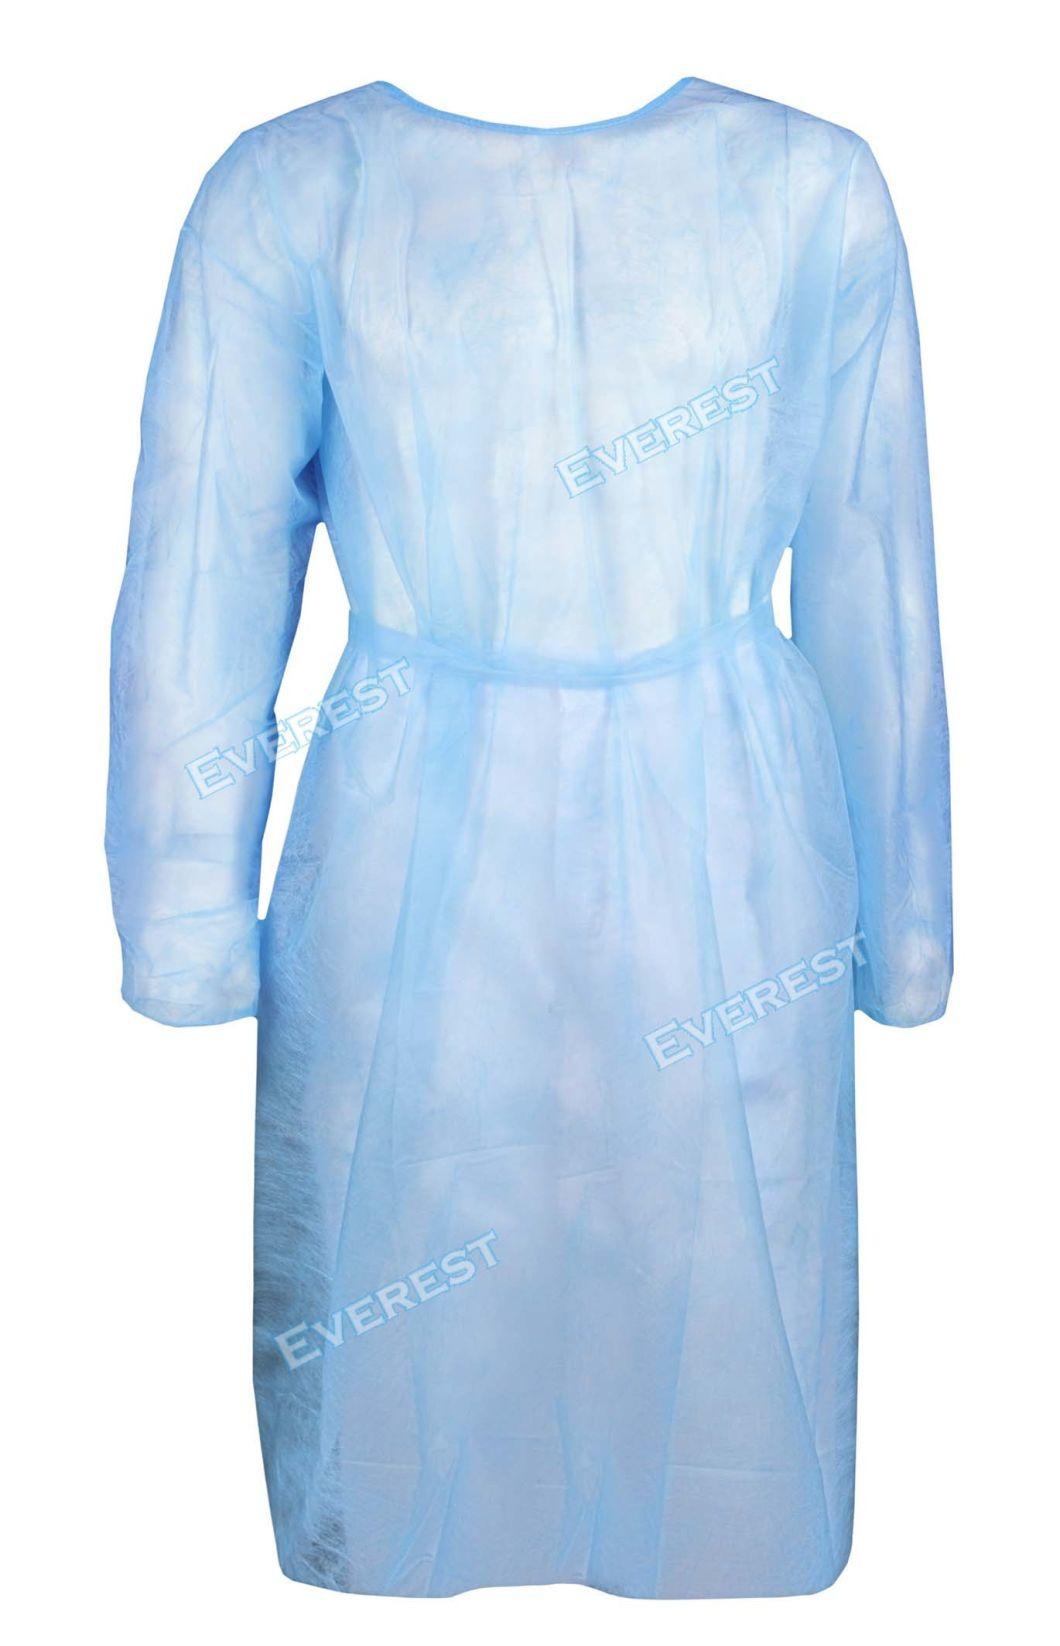 Knit/Knited Cuff Isolation Gown